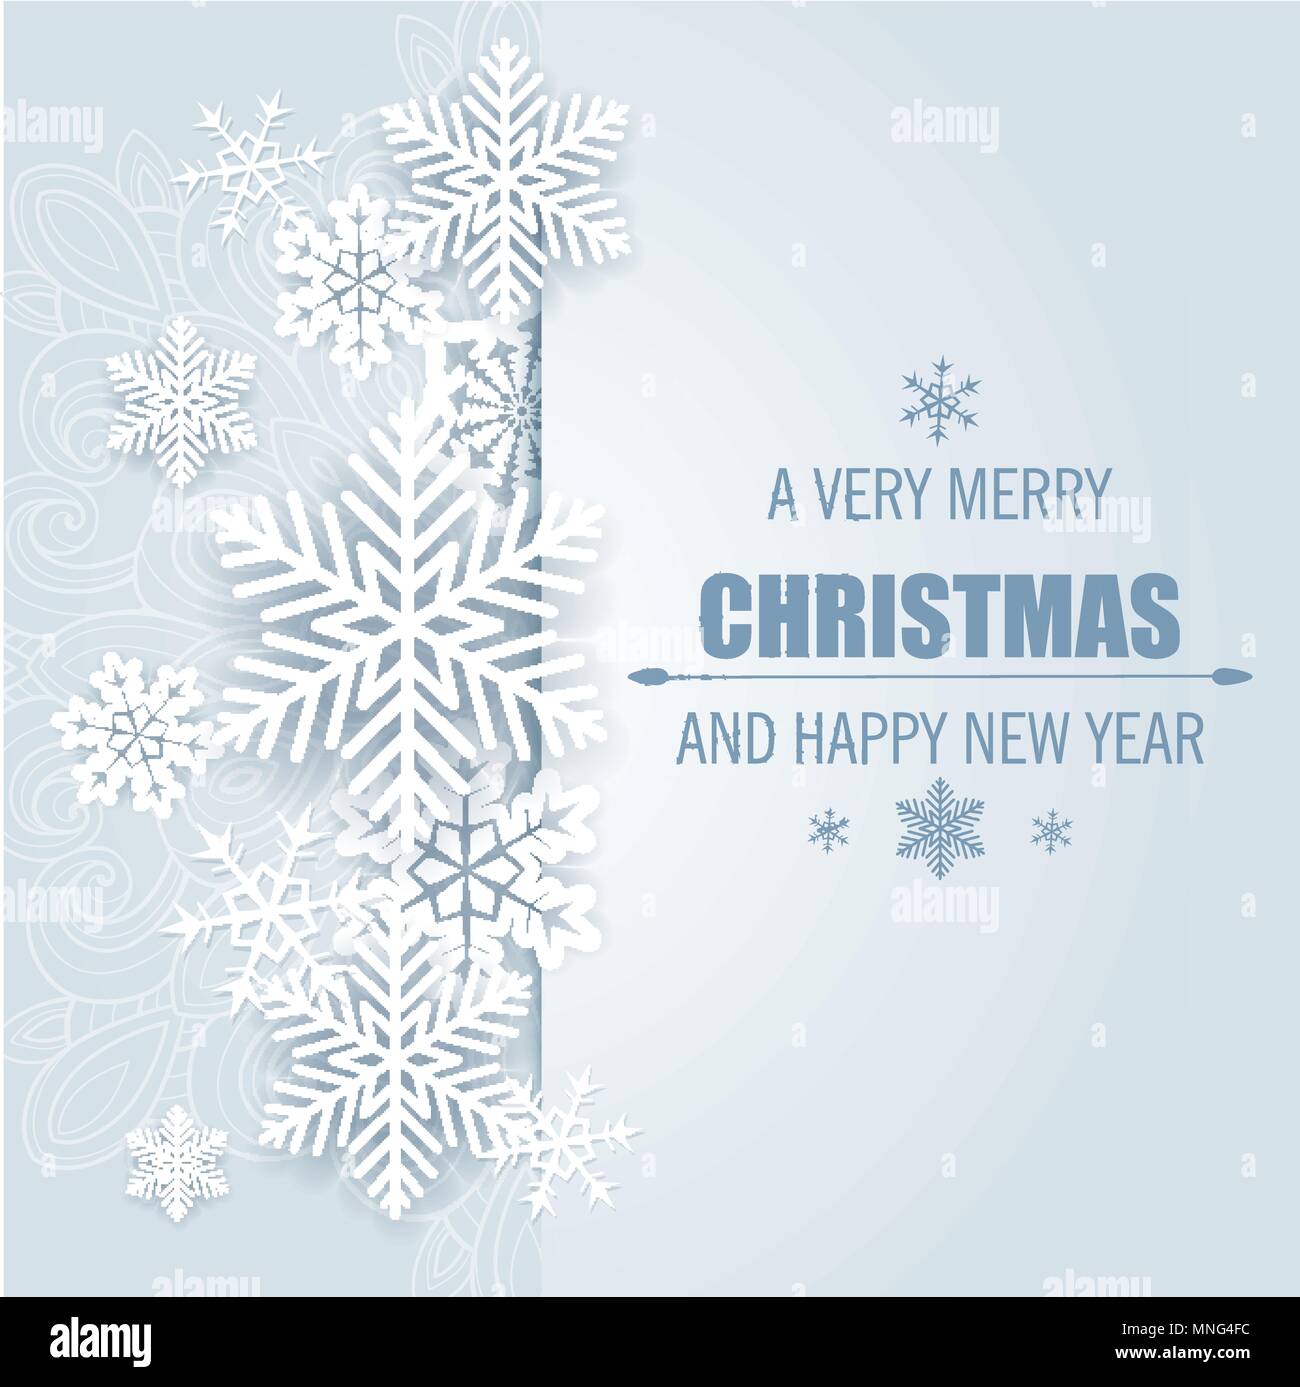 Decorative vector Christmas background with white paper snowflakes. Merry Christmas lettering. Stock Vector